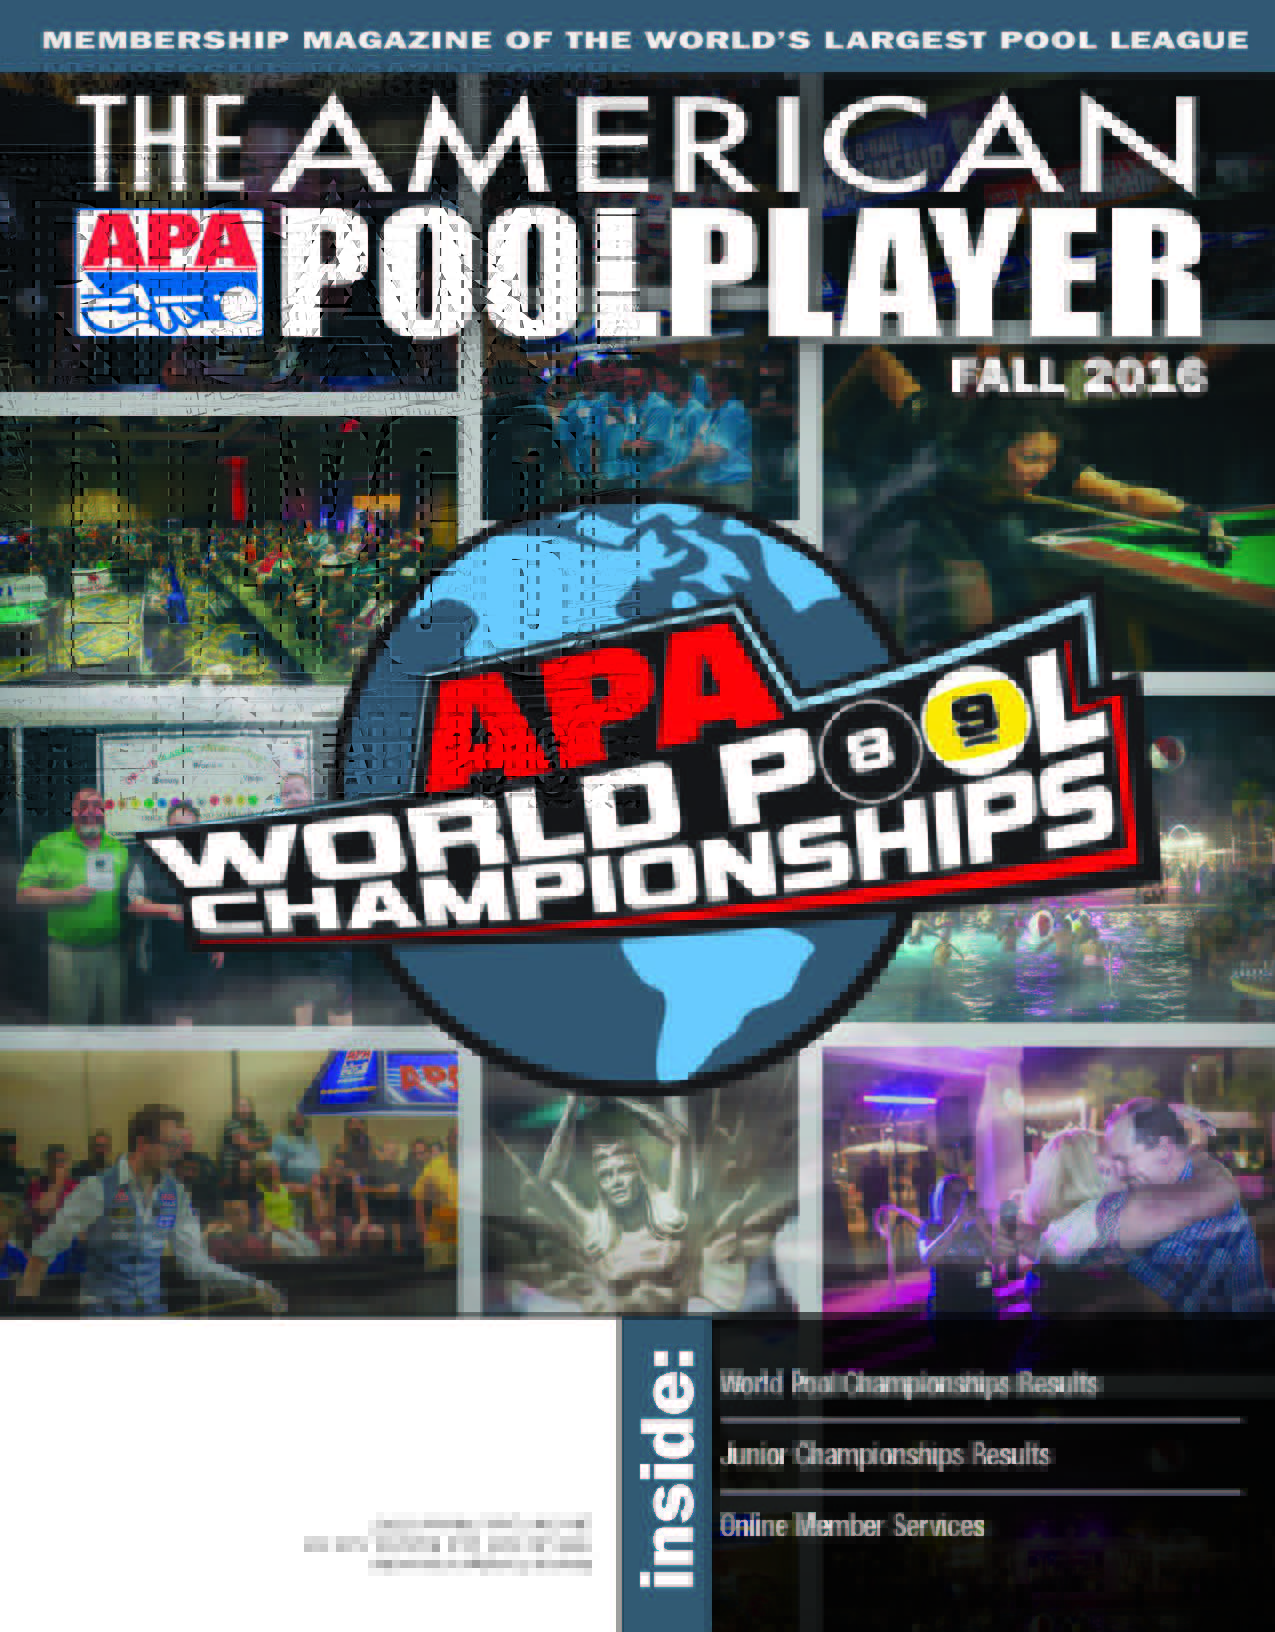 Fall 2016 Issue of The American Poolplayer Magazine